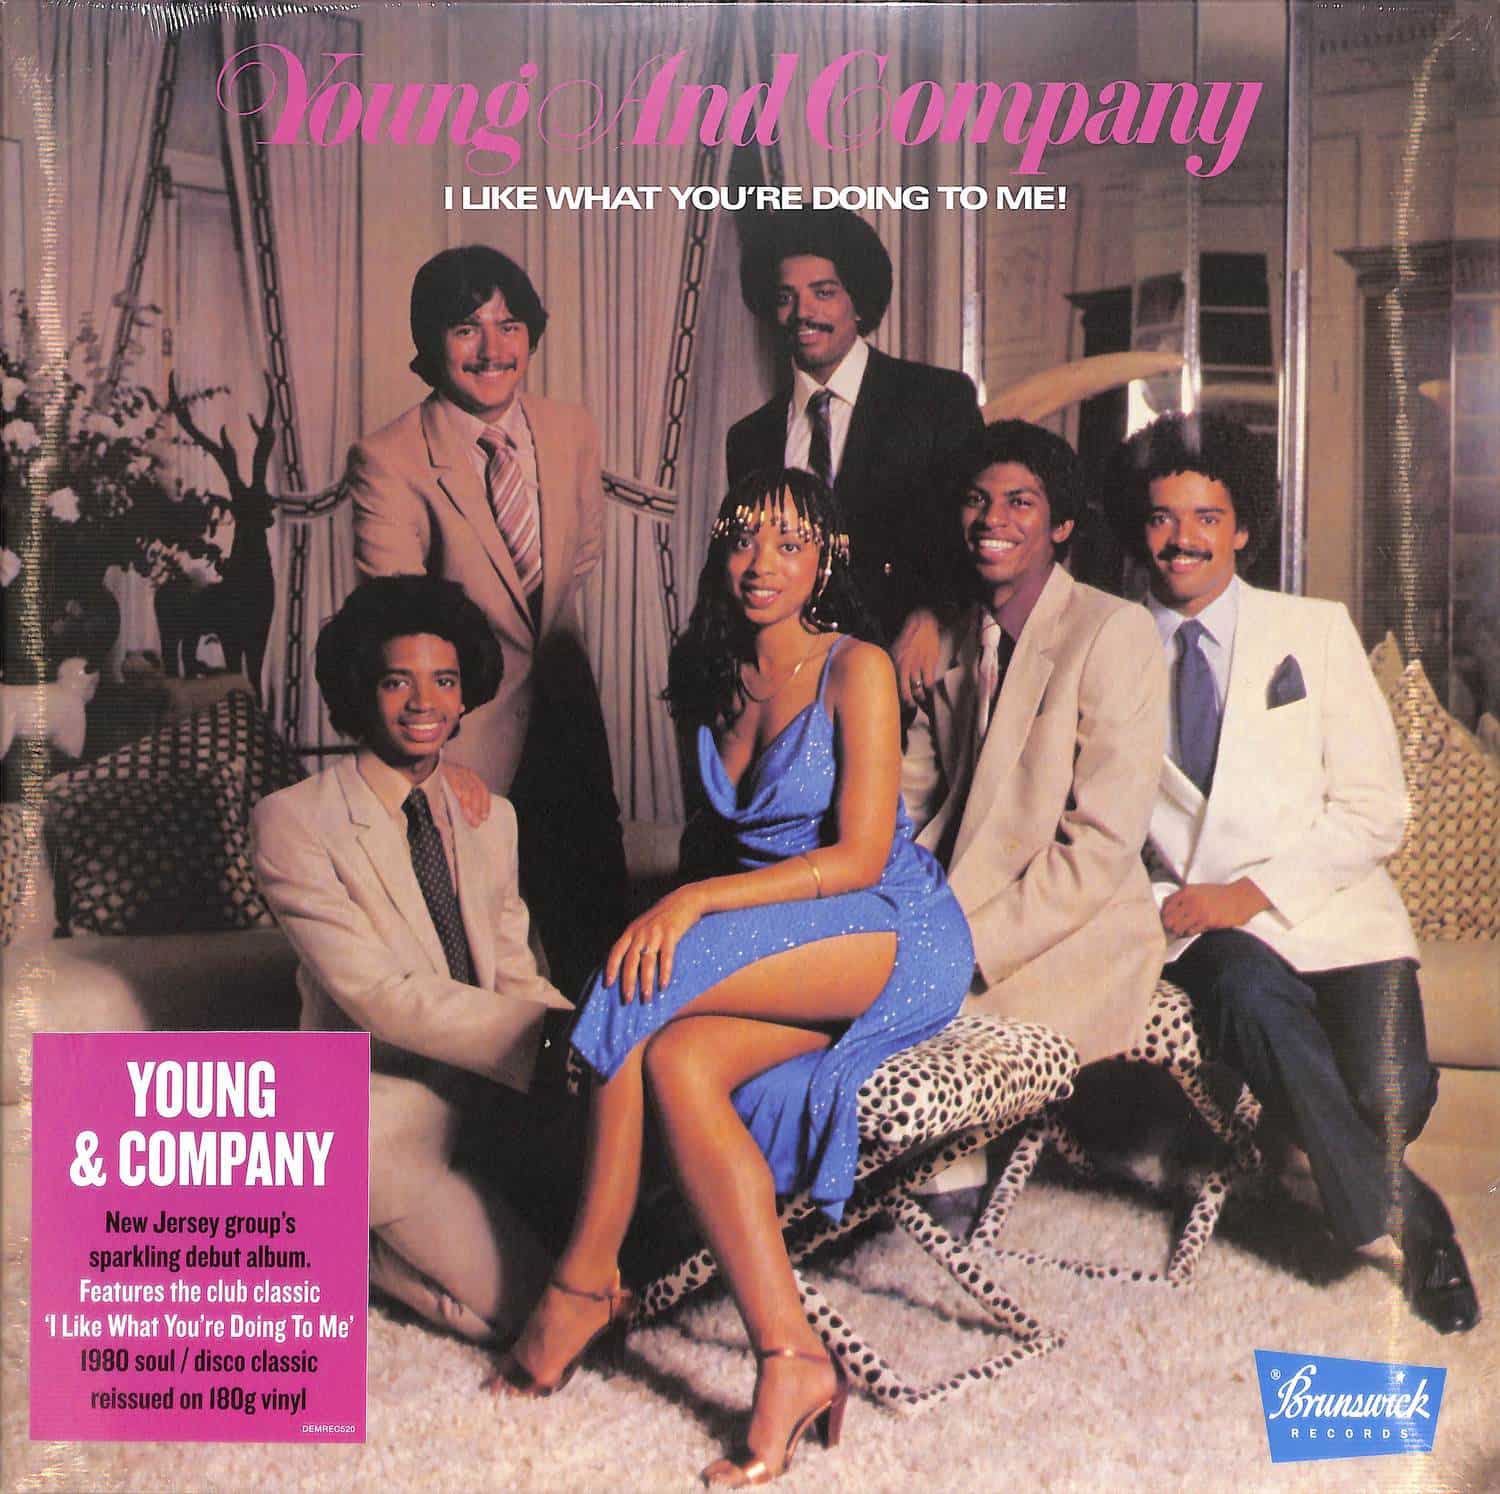 Young & Company - I LIKE WHAT YOU ARE DOING TO ME! 